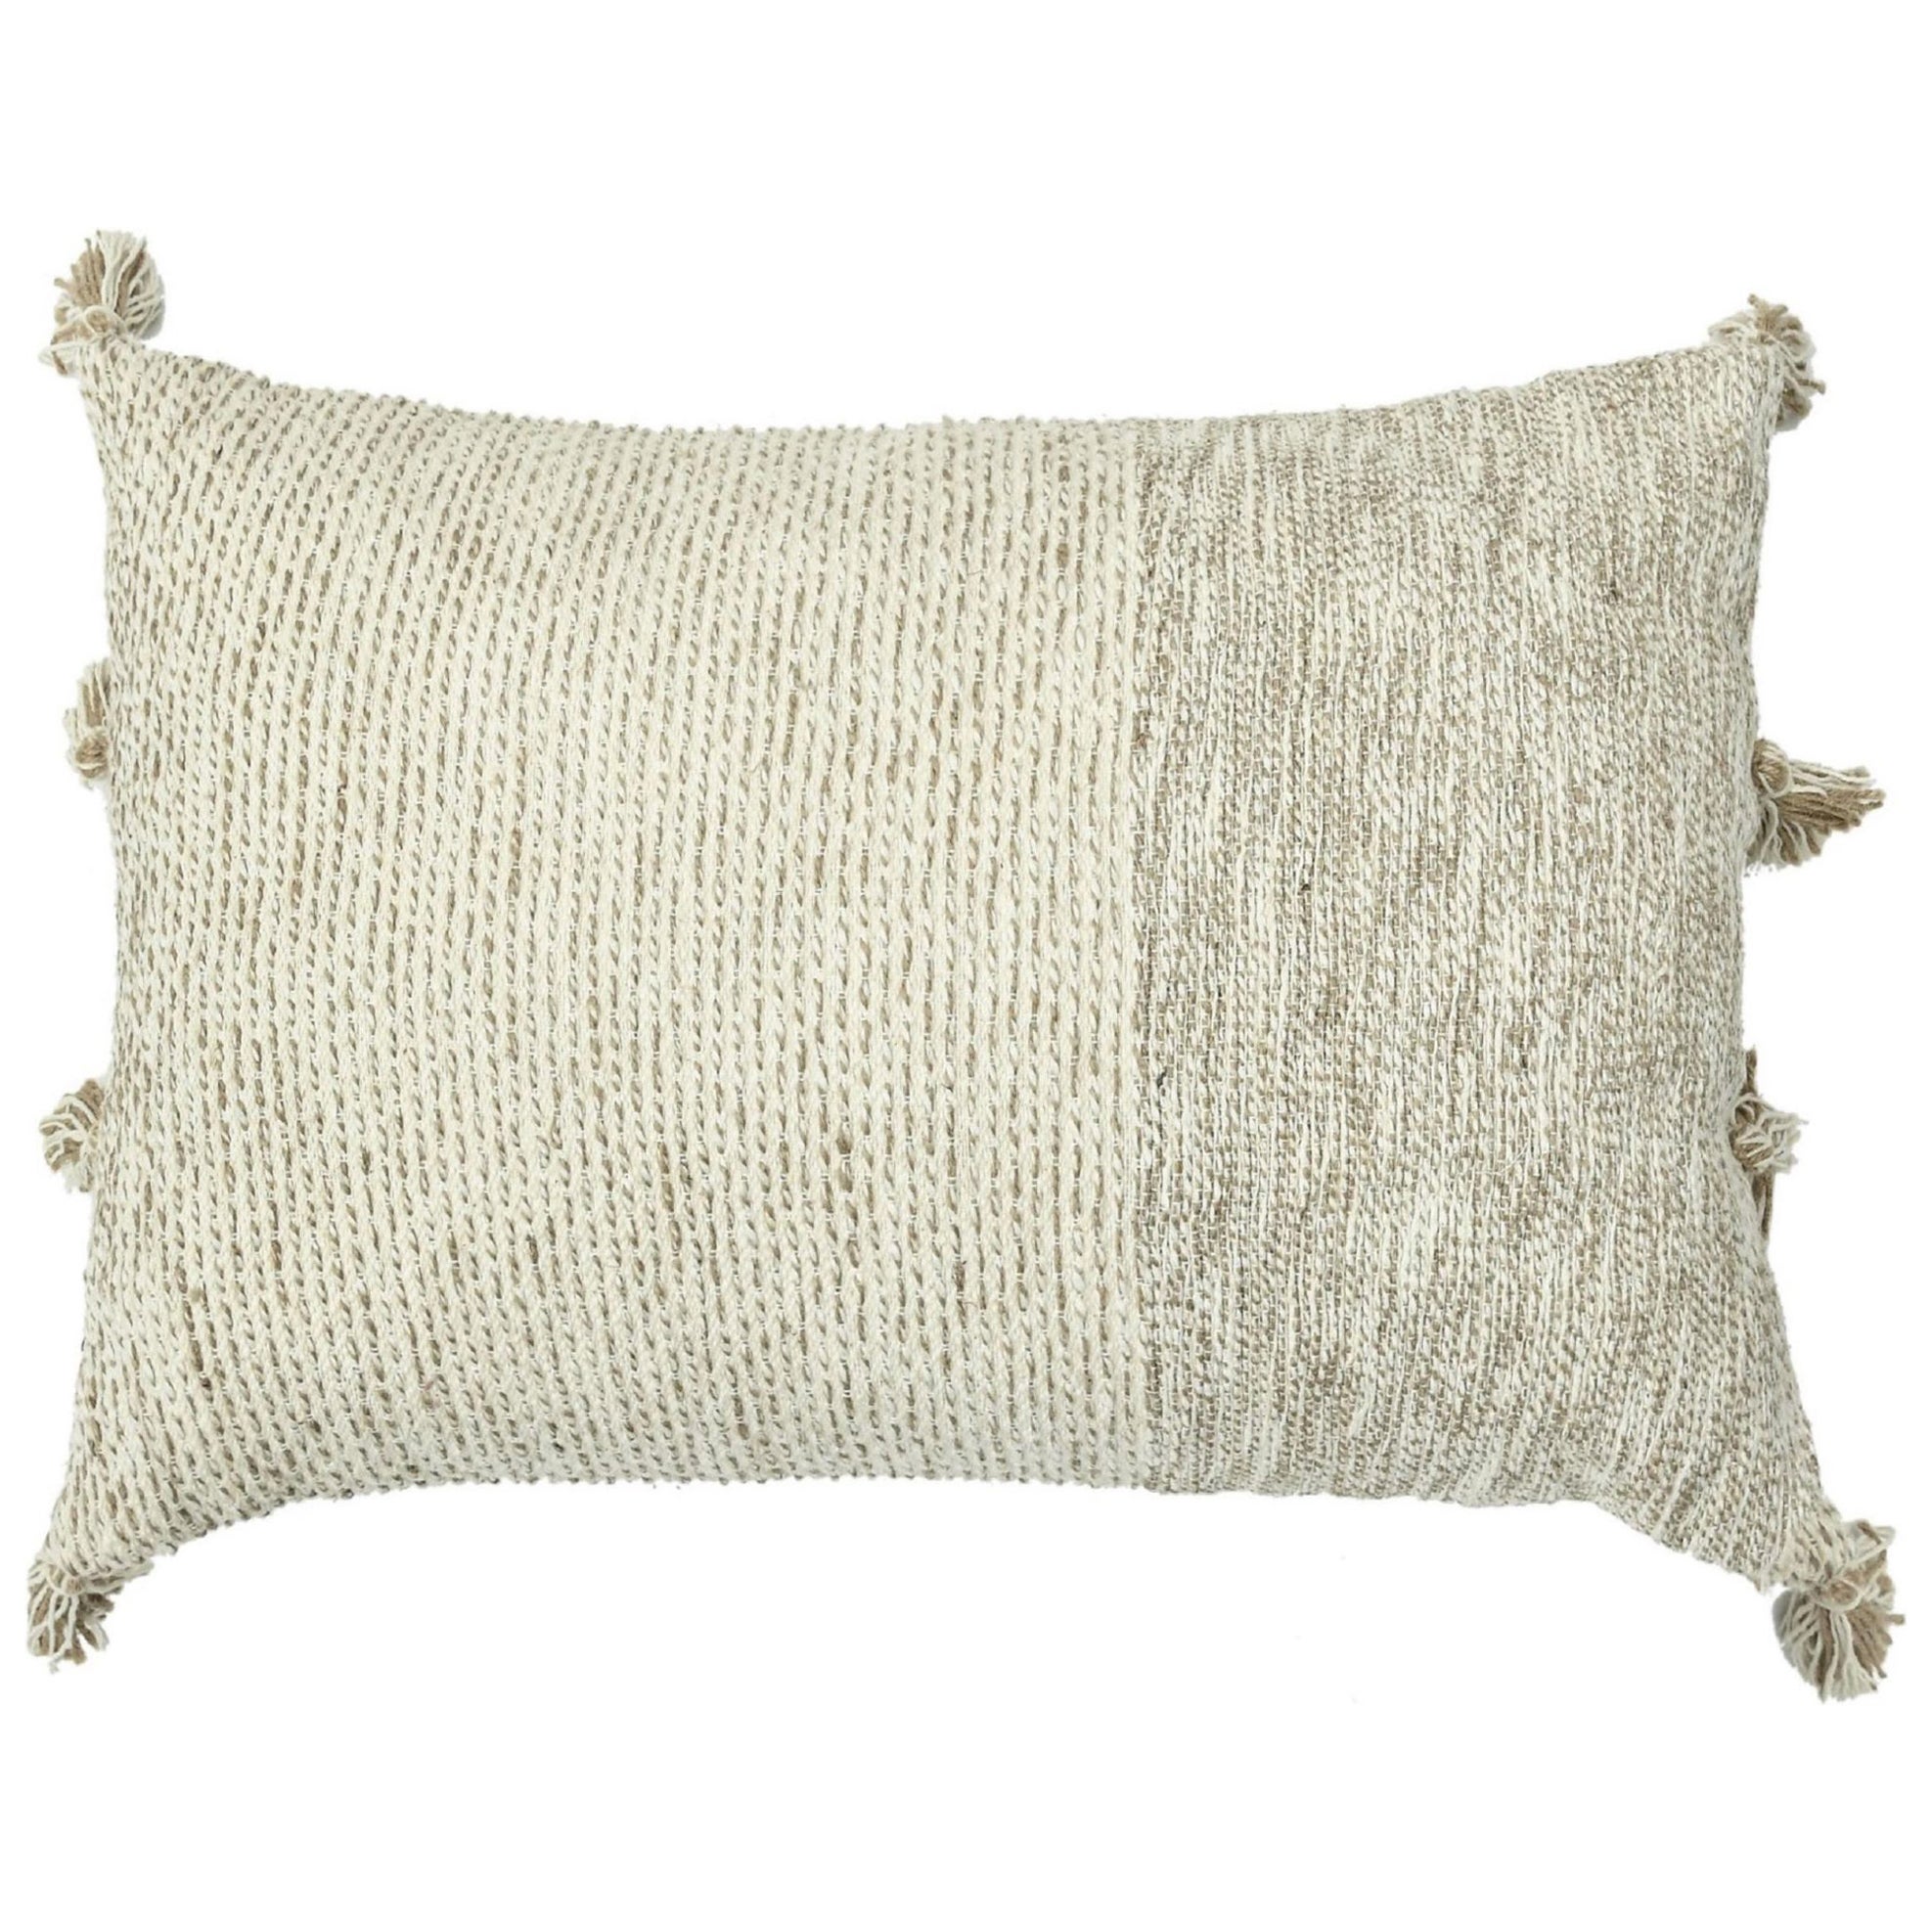 Boho Chic Style Contemporary Wool and Cotton Pillow In Beige For Sale